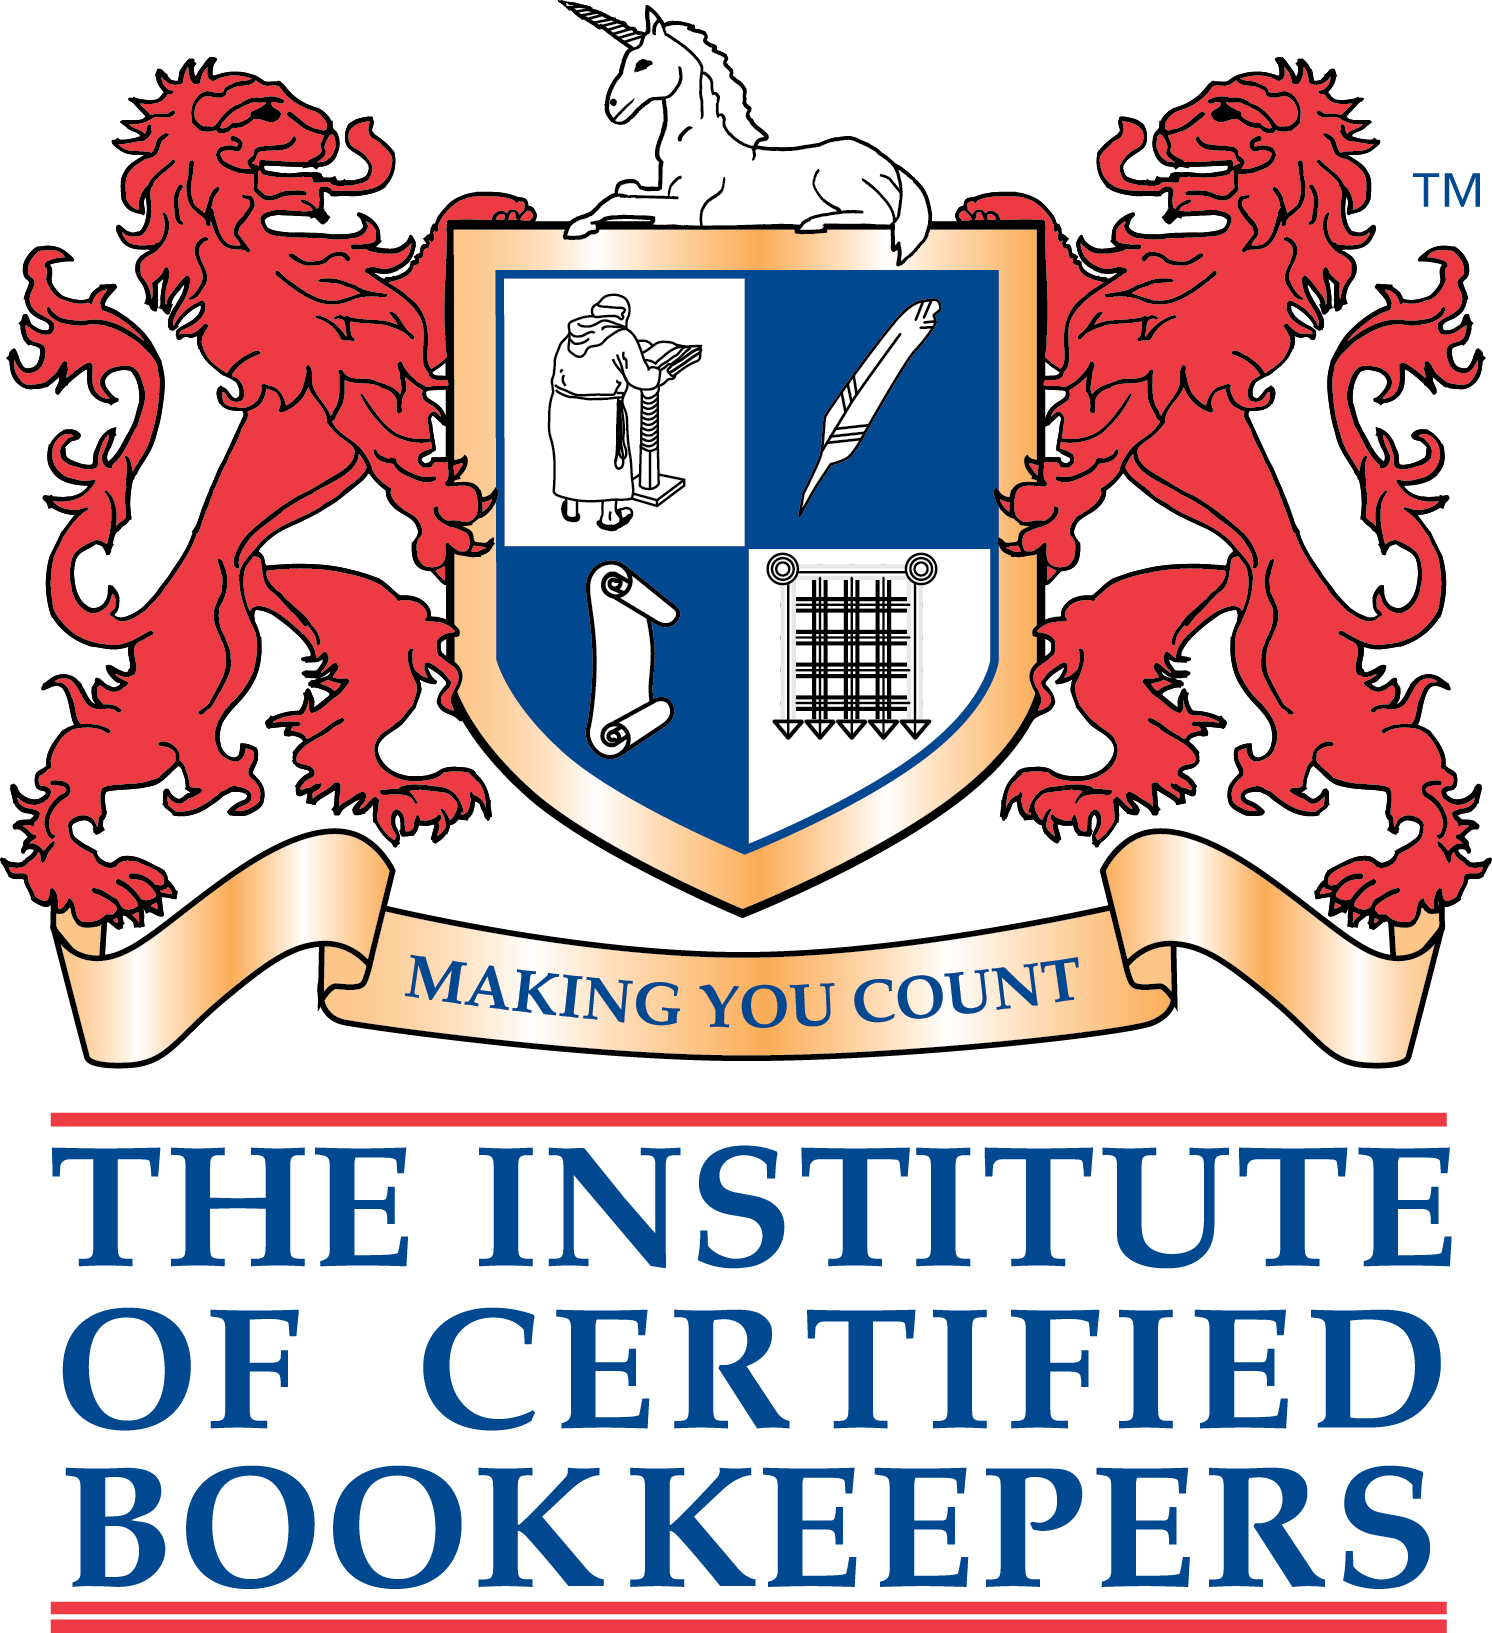 We are proud to practice under licence from the Institute of Certified Bookkeepers